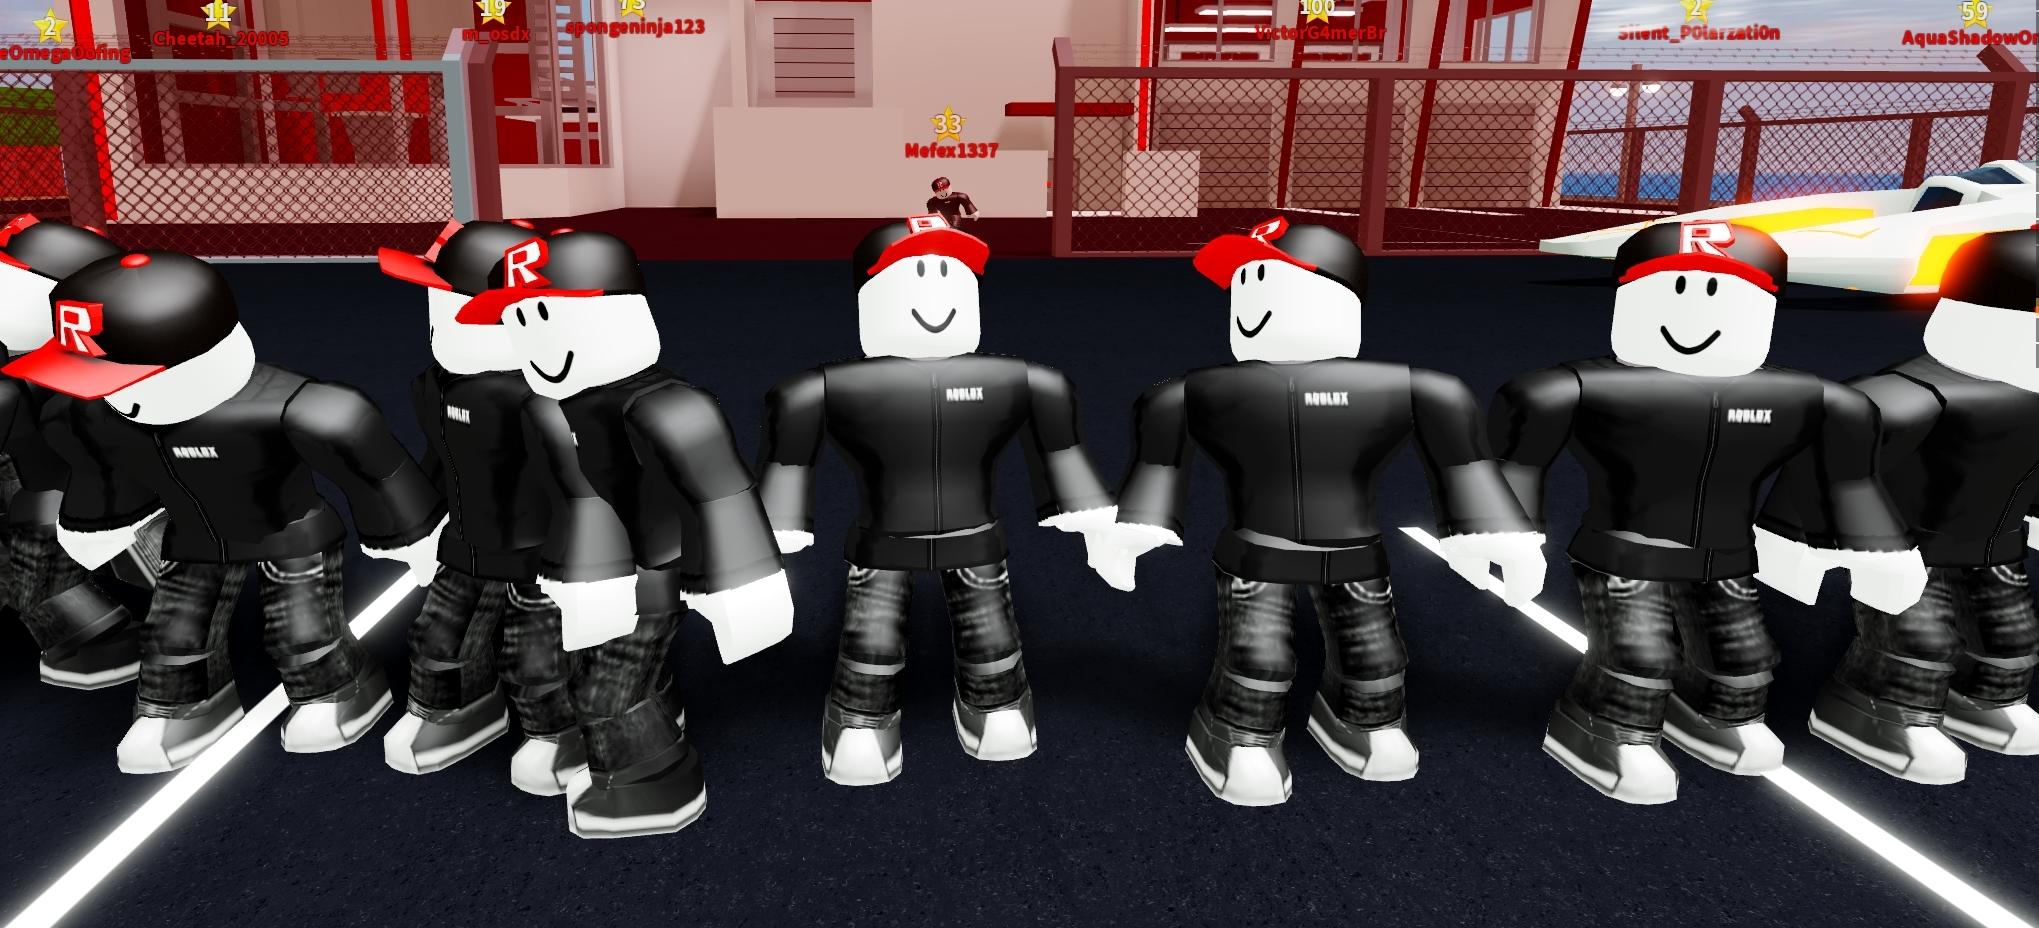 Roblox Guests throughout history